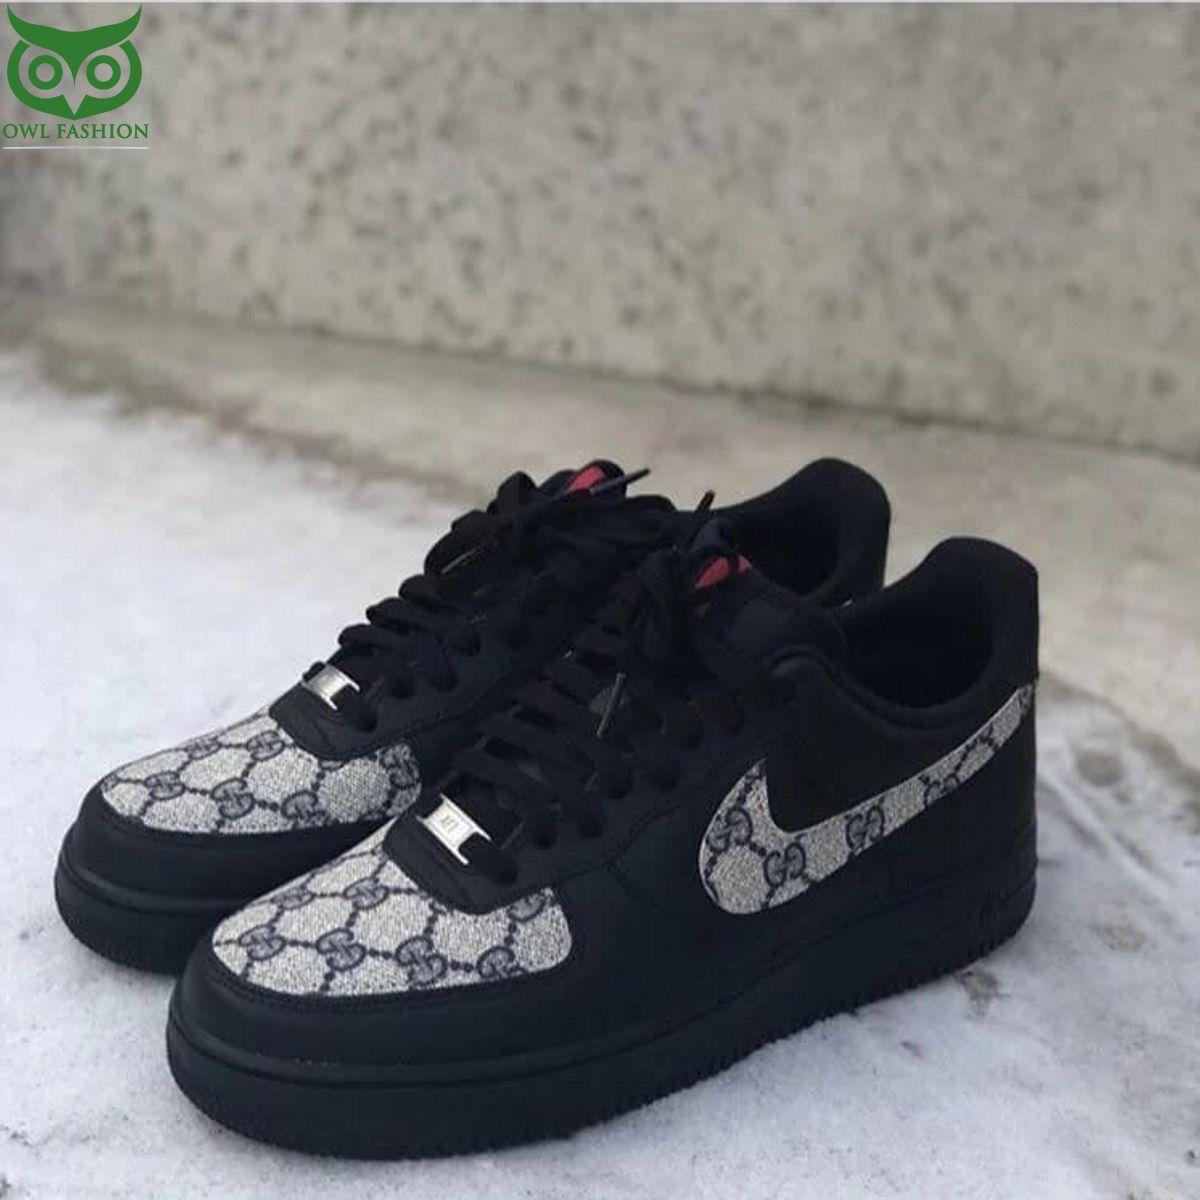 Black Gucci Air Force 1 Custom The overall aesthetics are top notch.